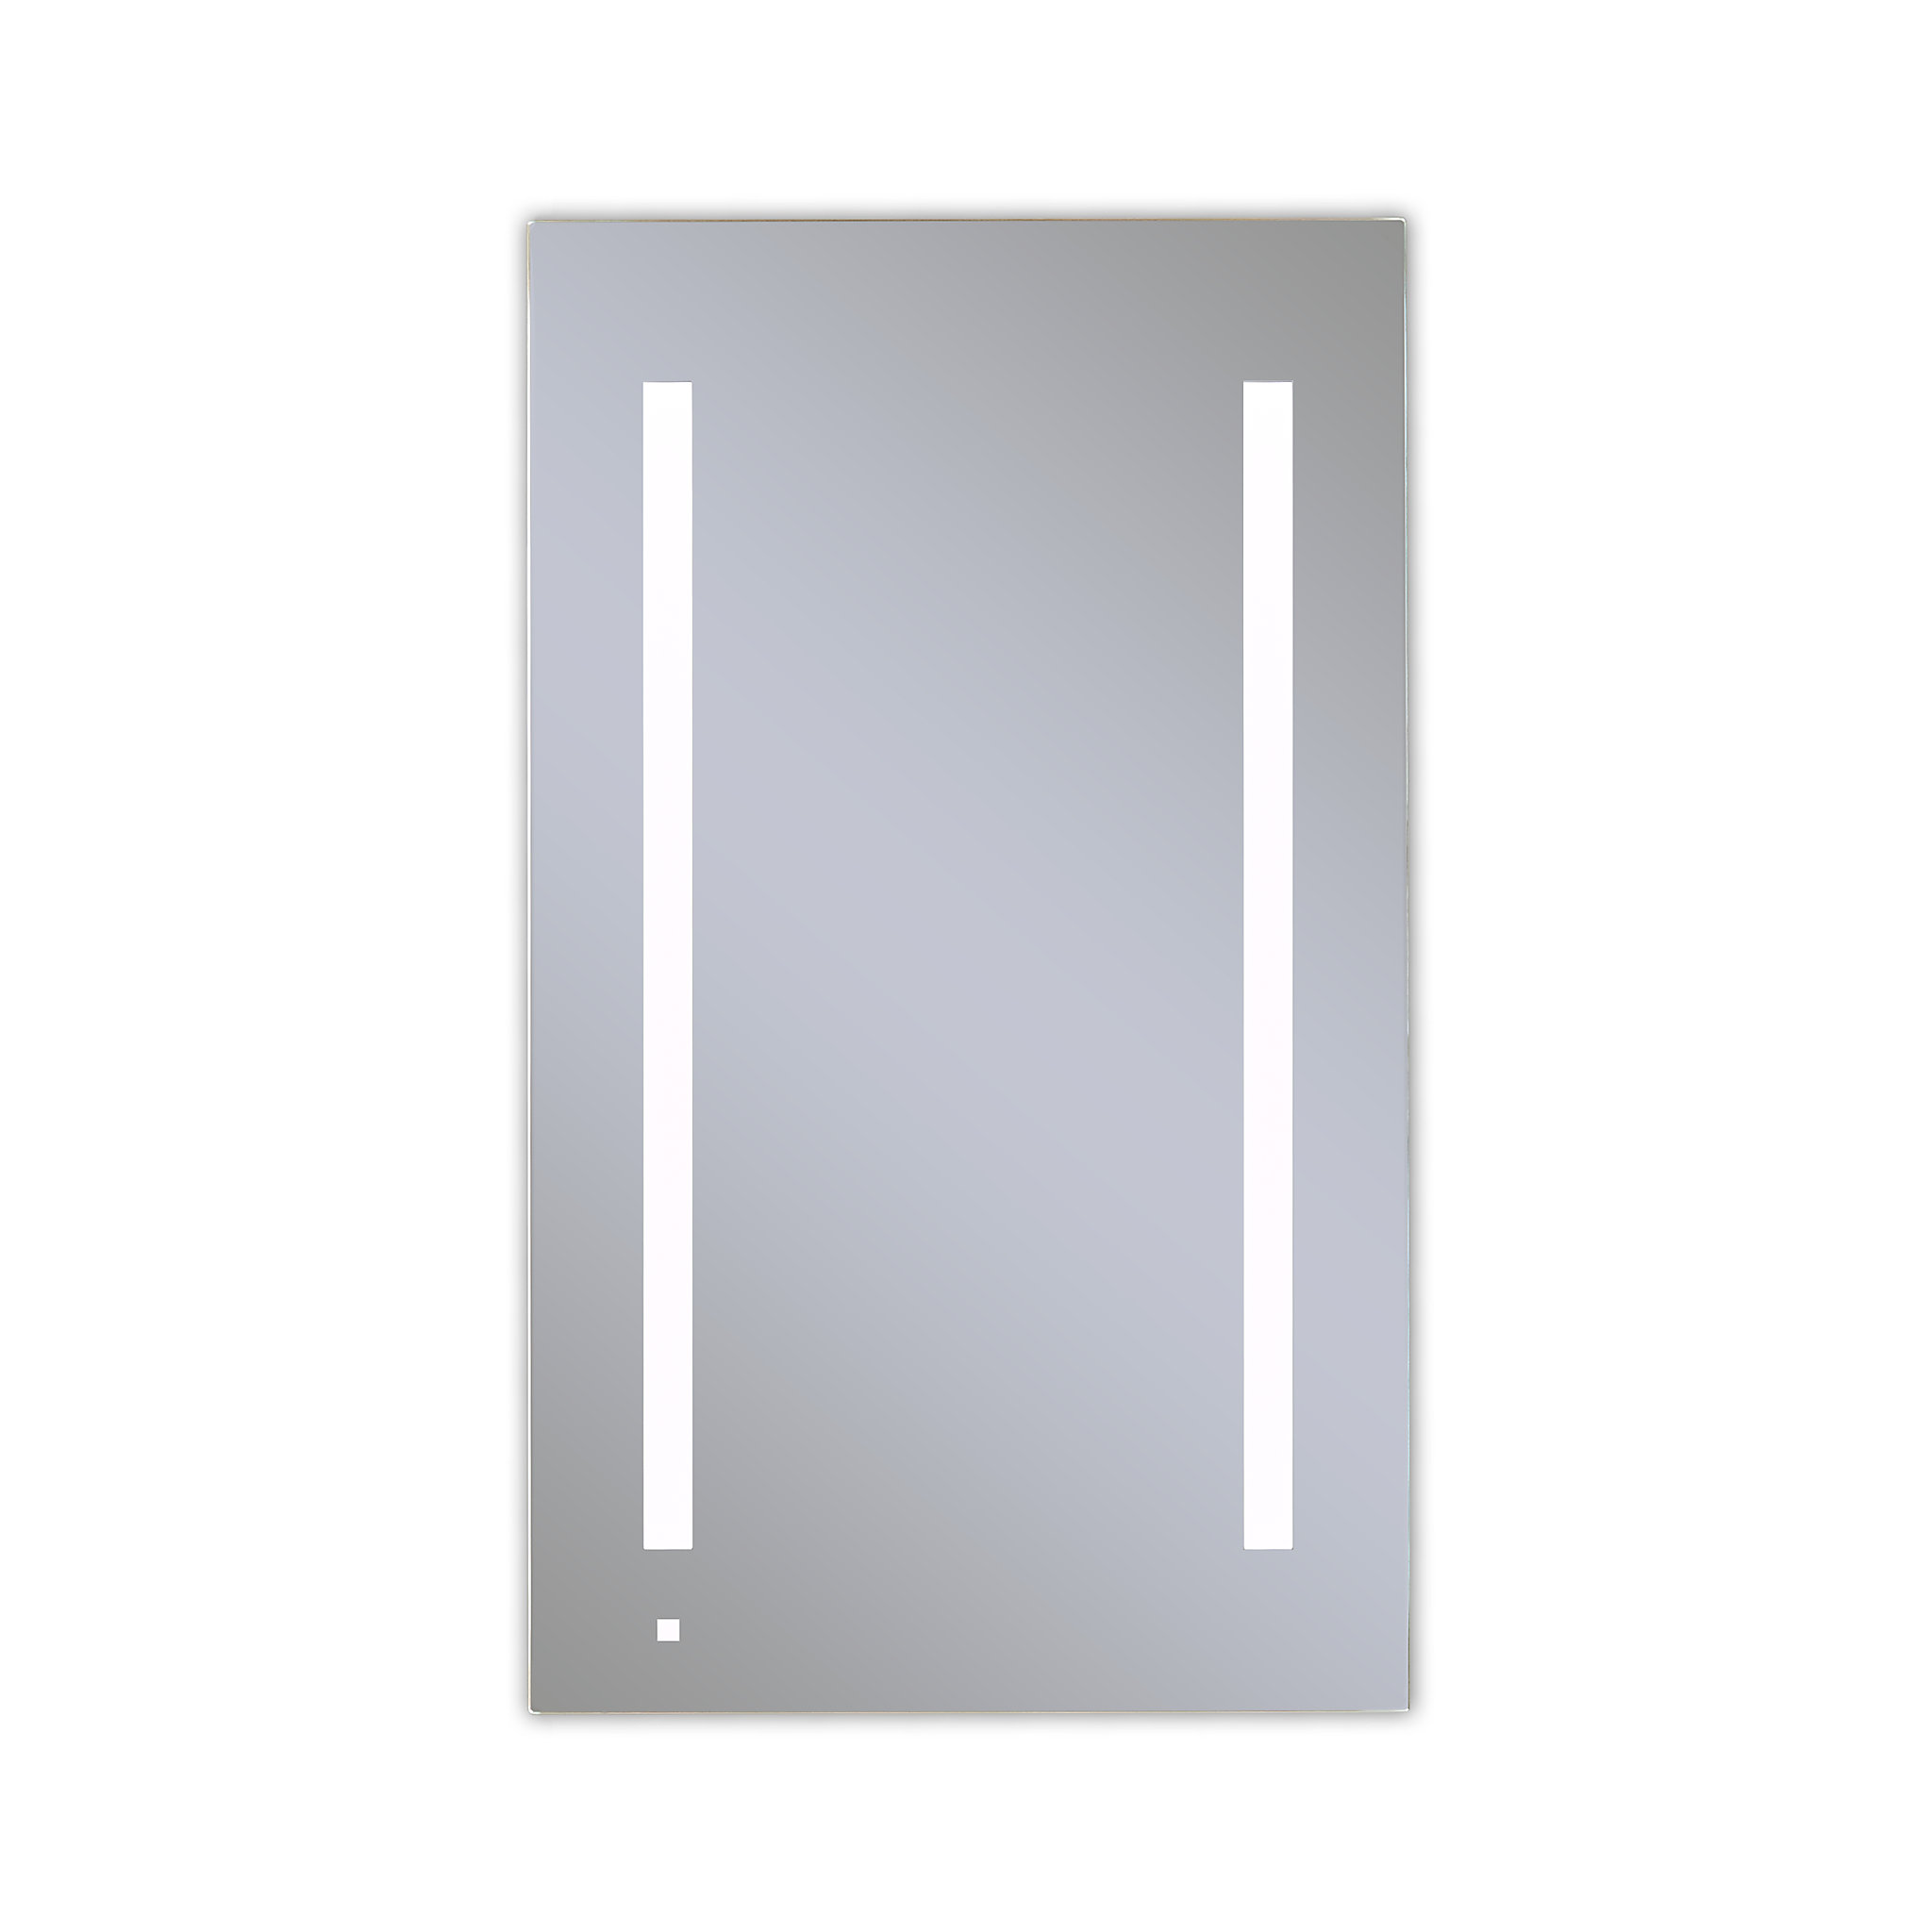 Robern AC2440D4P1R AiO Lighted Cabinet, 24" x 40" x 4", LUM Lighting, 4000K Temperature (Cool Light), Dimmable, Electrical Outle